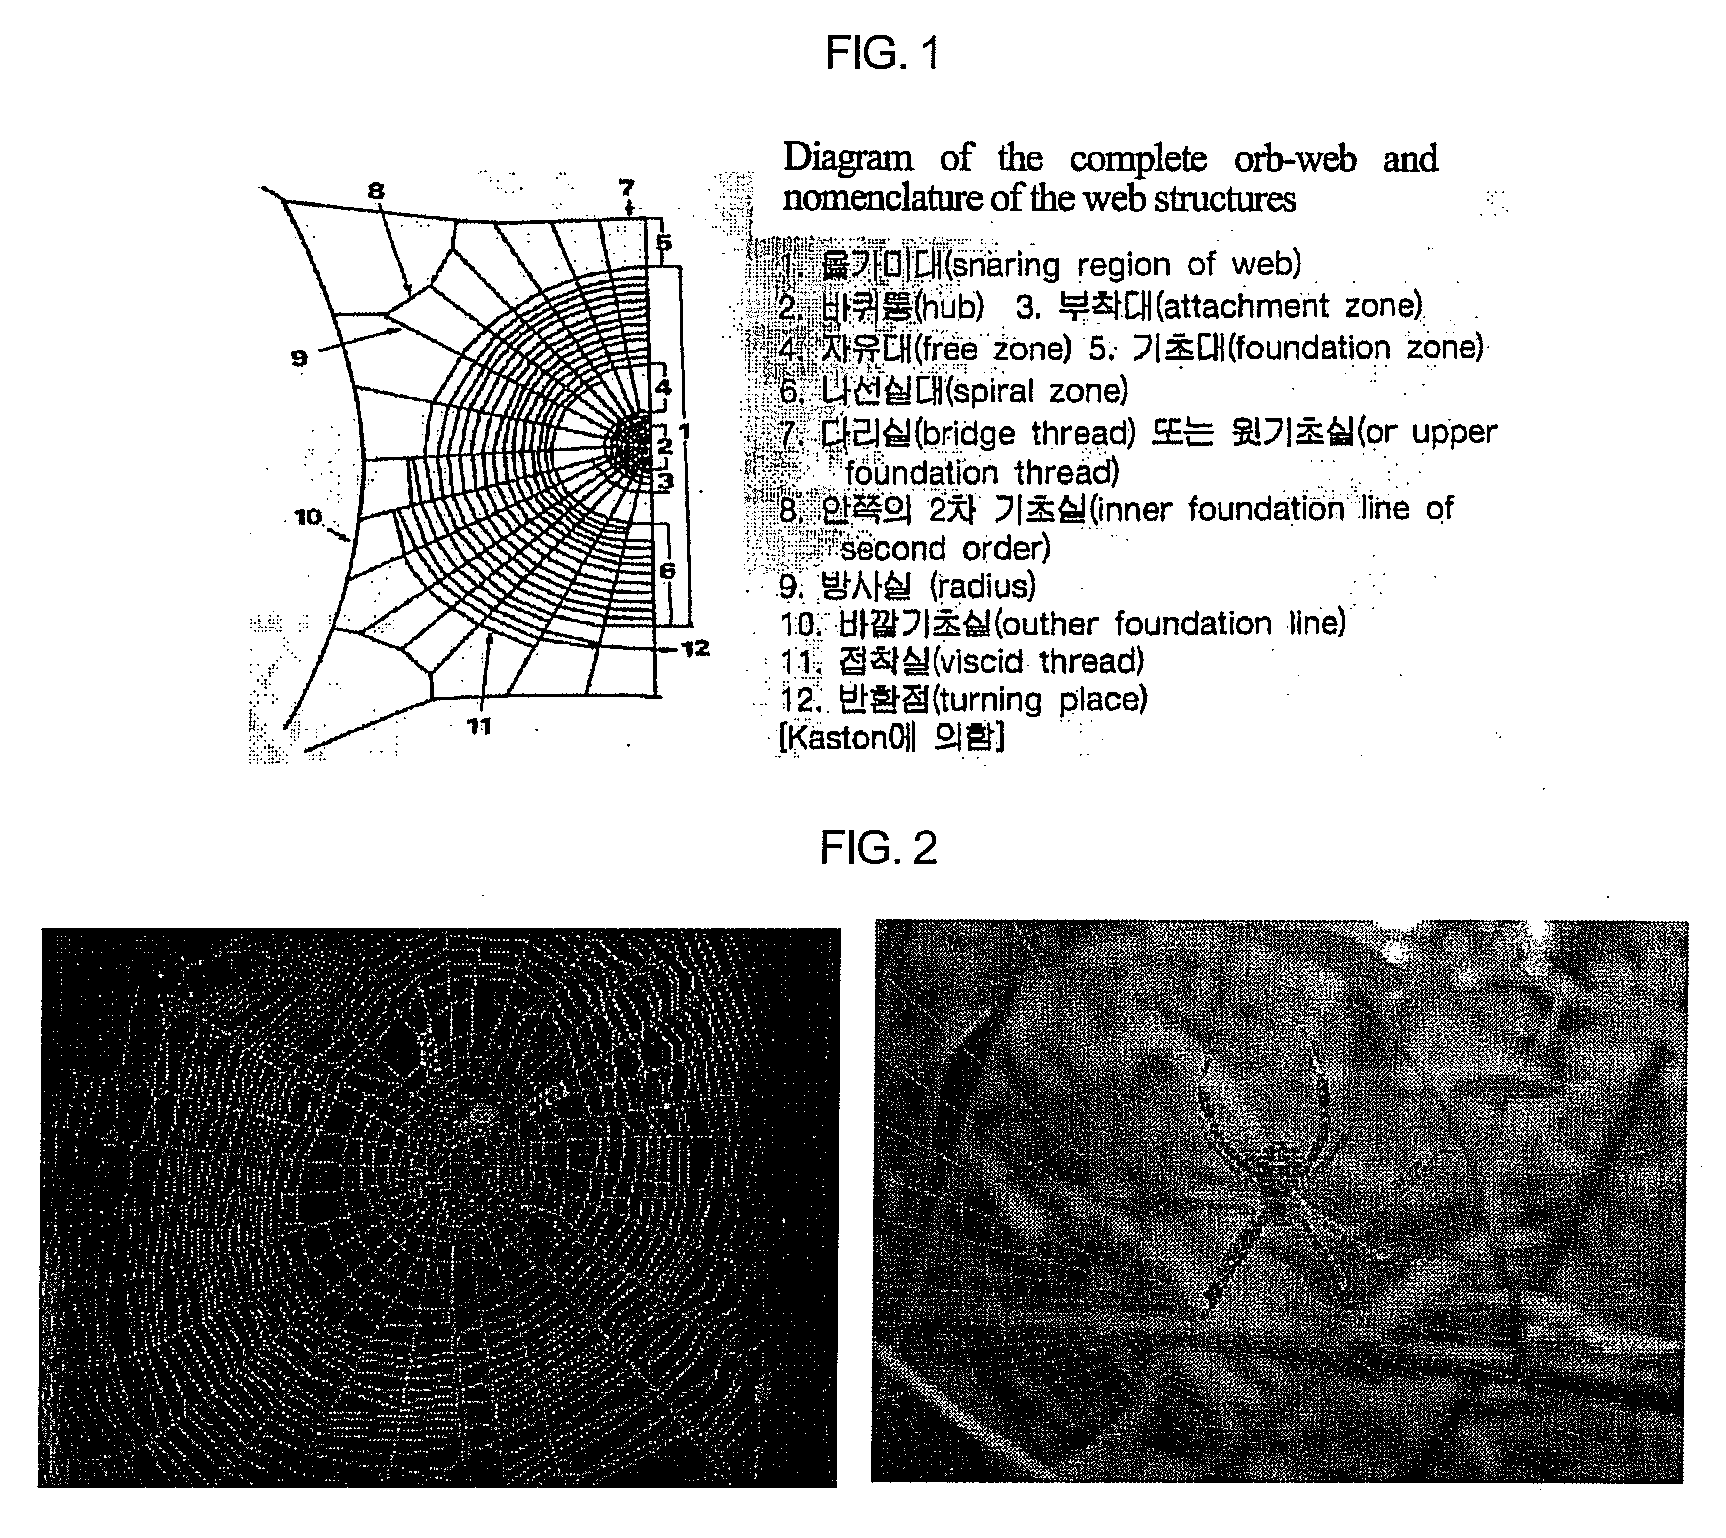 Method for modeling a structure of a spider web using computer programming